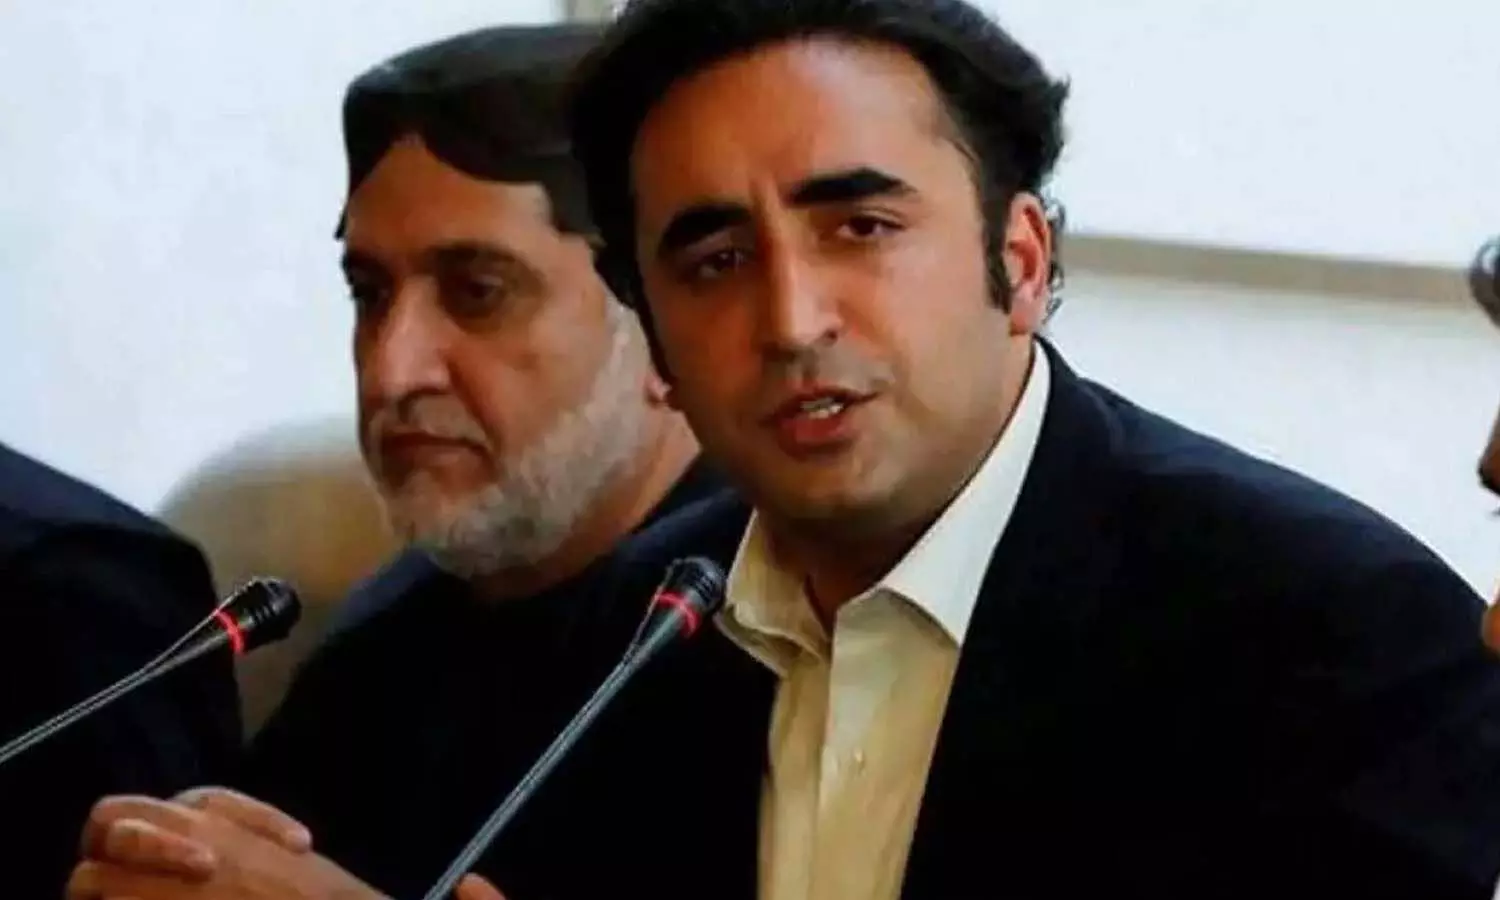 Pakistan: Bilawal Bhutto-Zardari became the youngest foreign minister of Pakistan